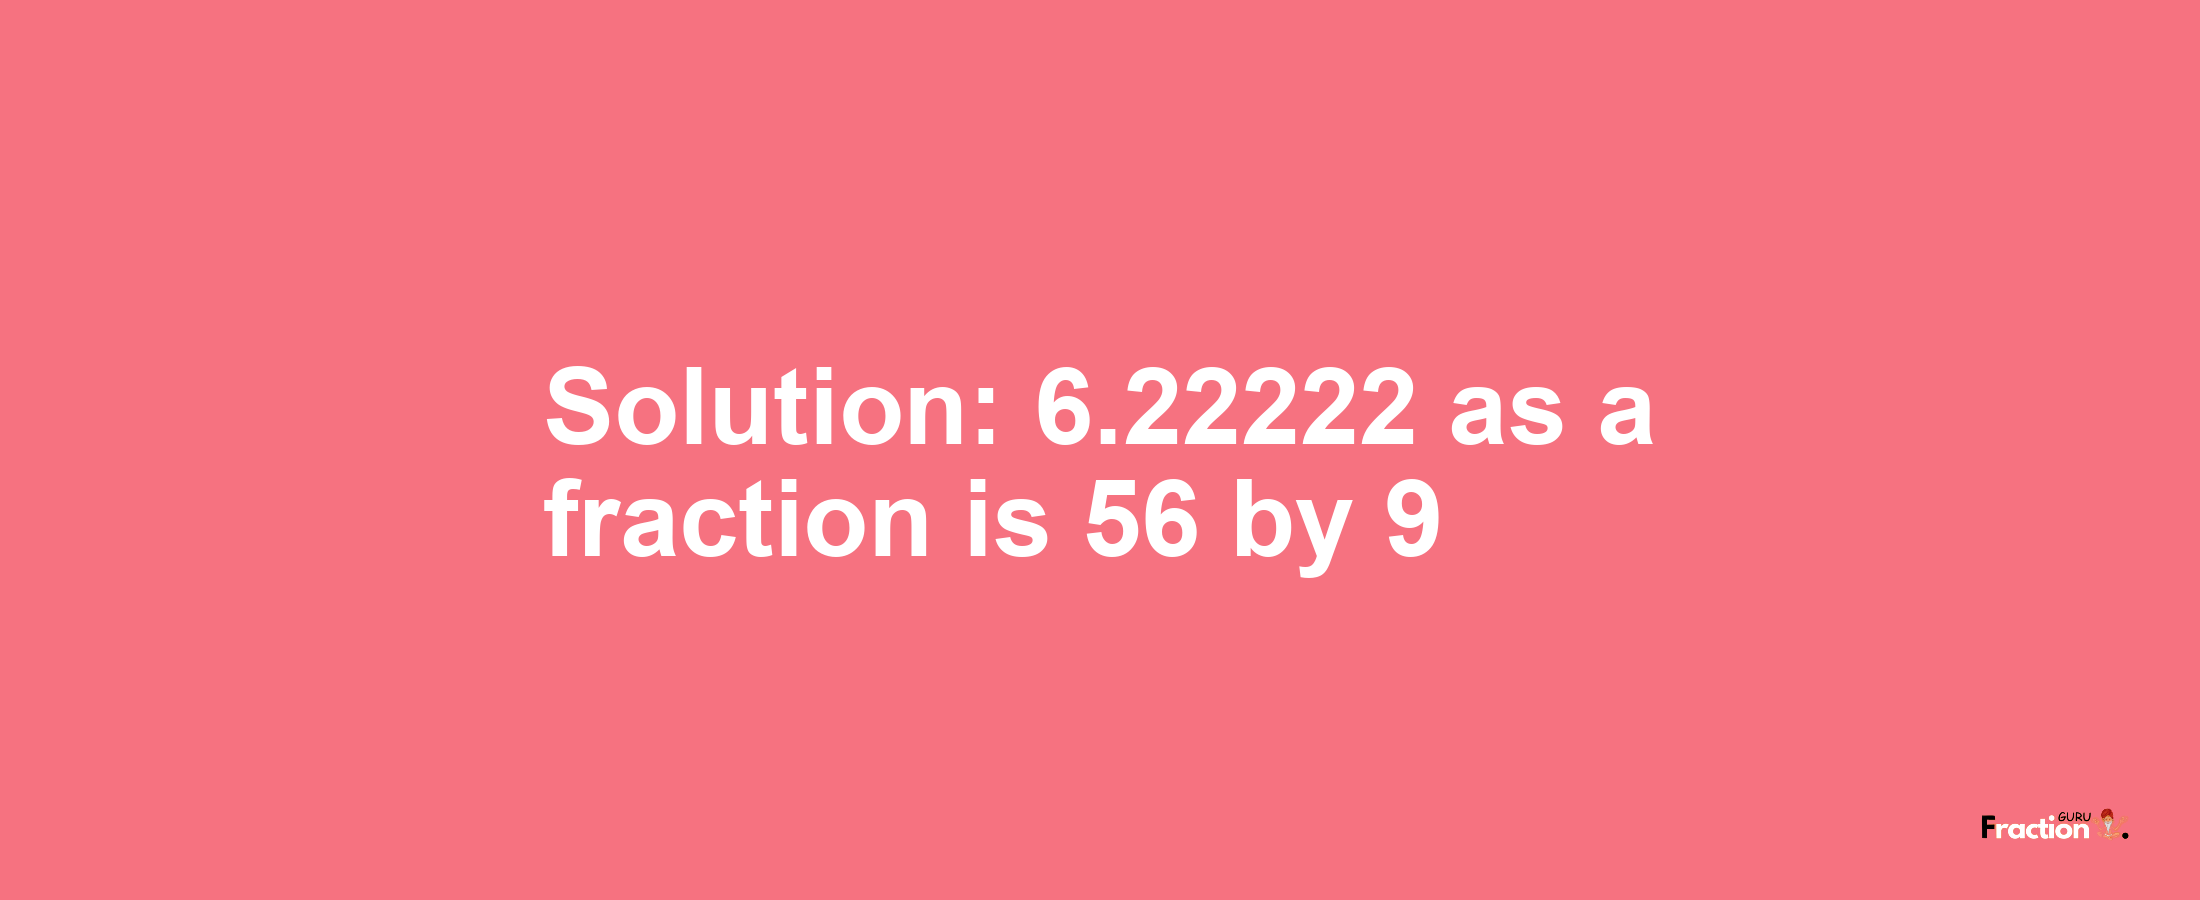 Solution:6.22222 as a fraction is 56/9